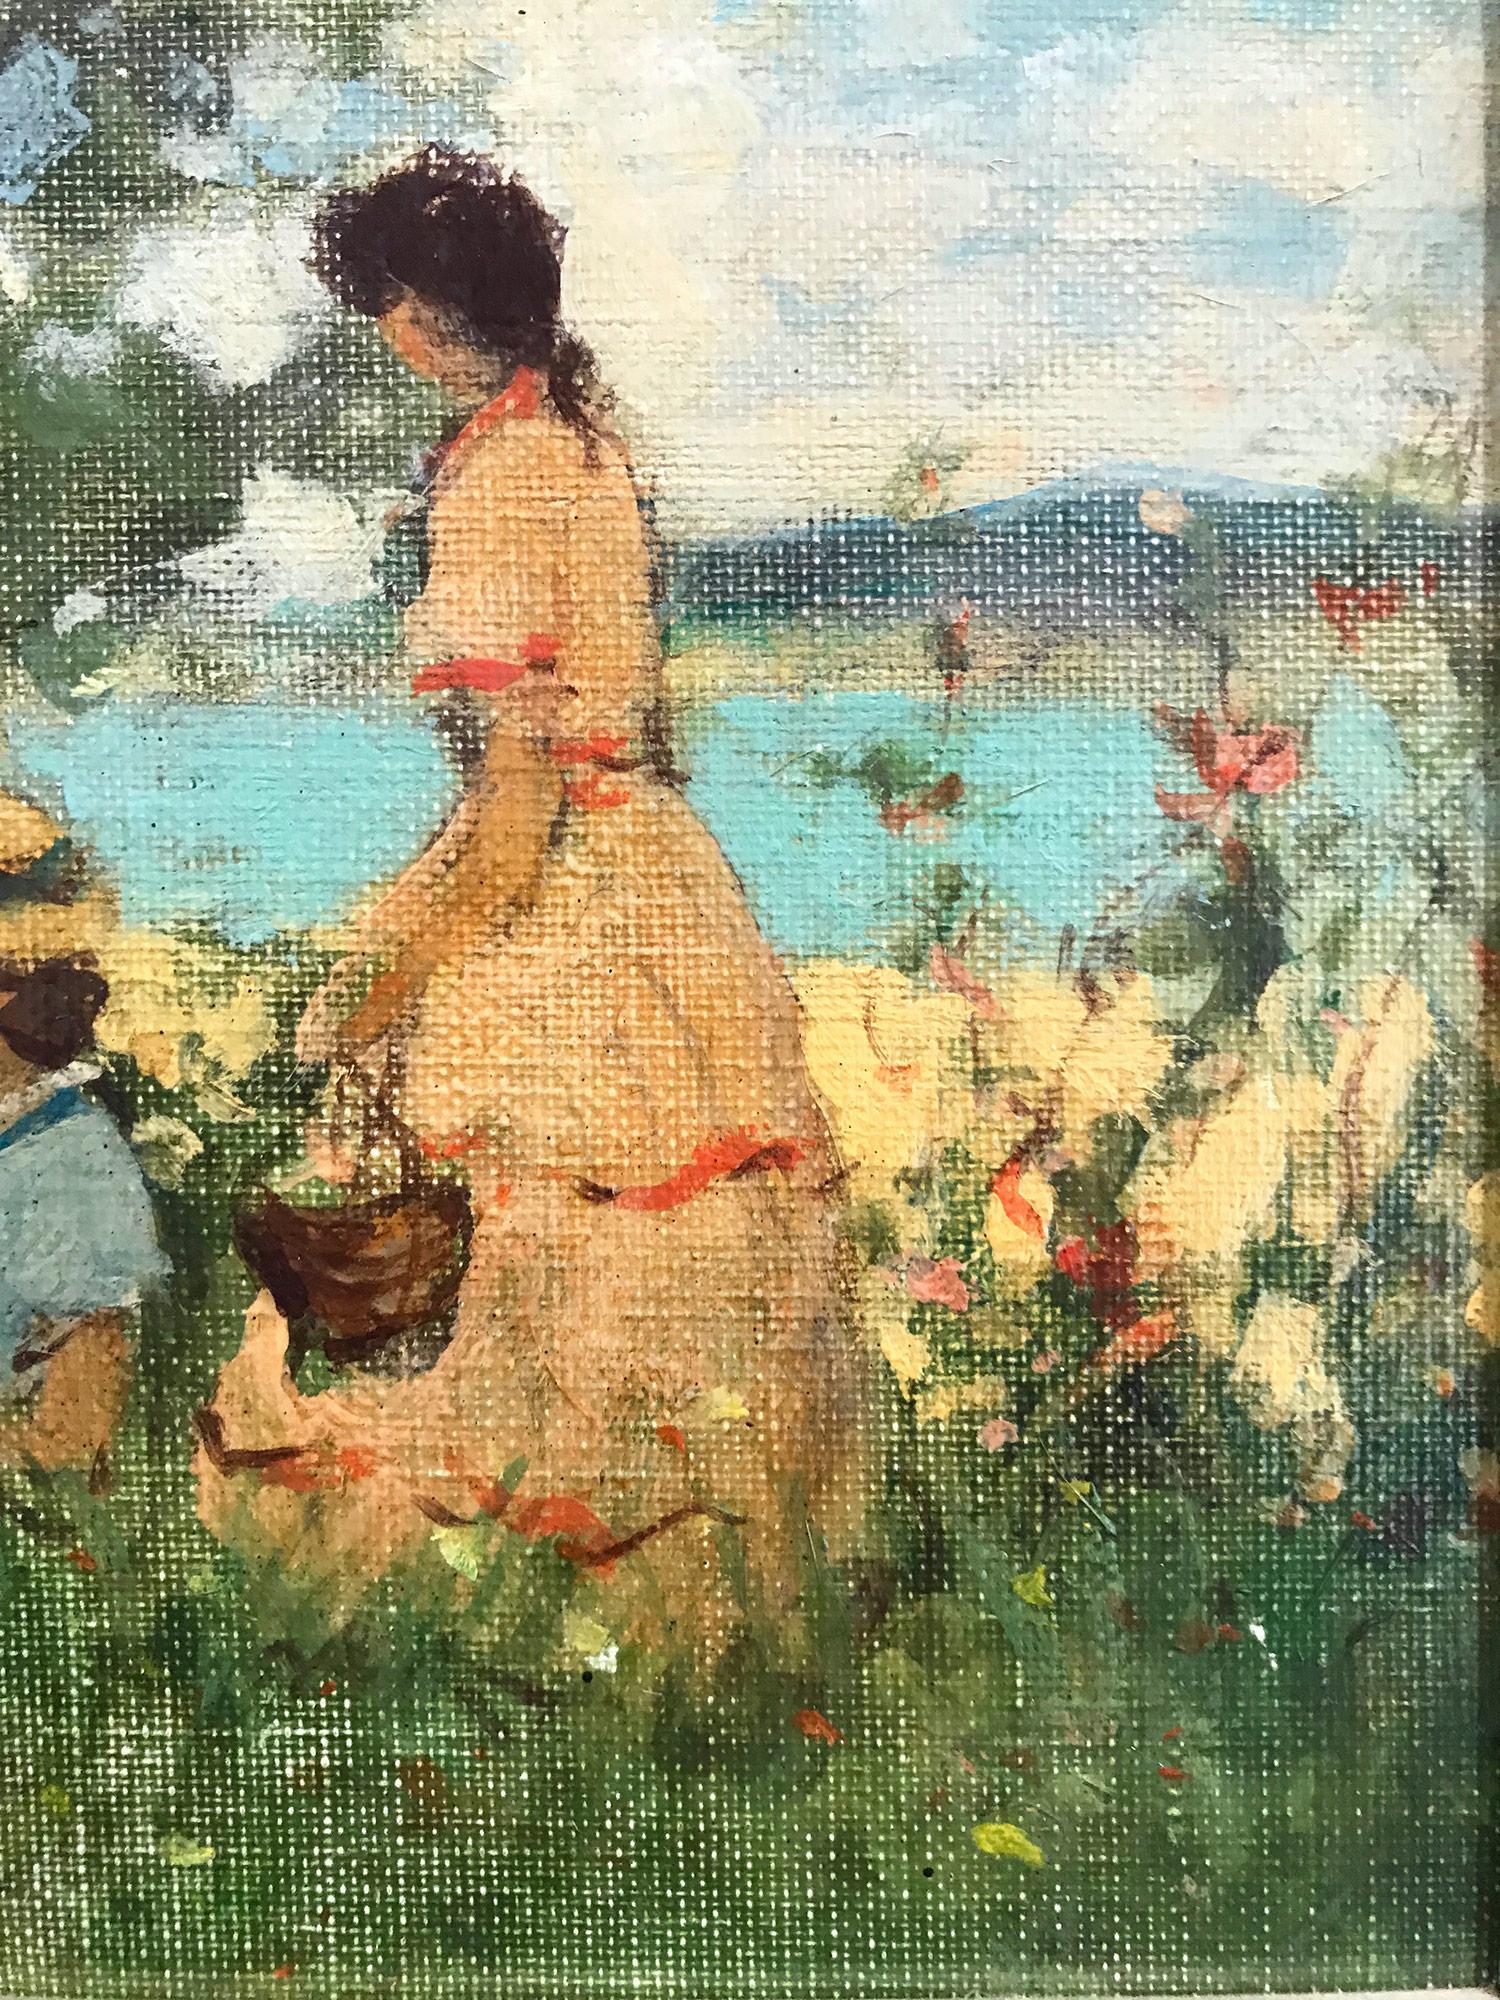 A whimsical oil painting depicting a picnic park scene near a lake during the early 20th Century. Demarest was known for her charming intimate figurative scenes portraying life in the North East. She was profoundly active, picking up her subjects